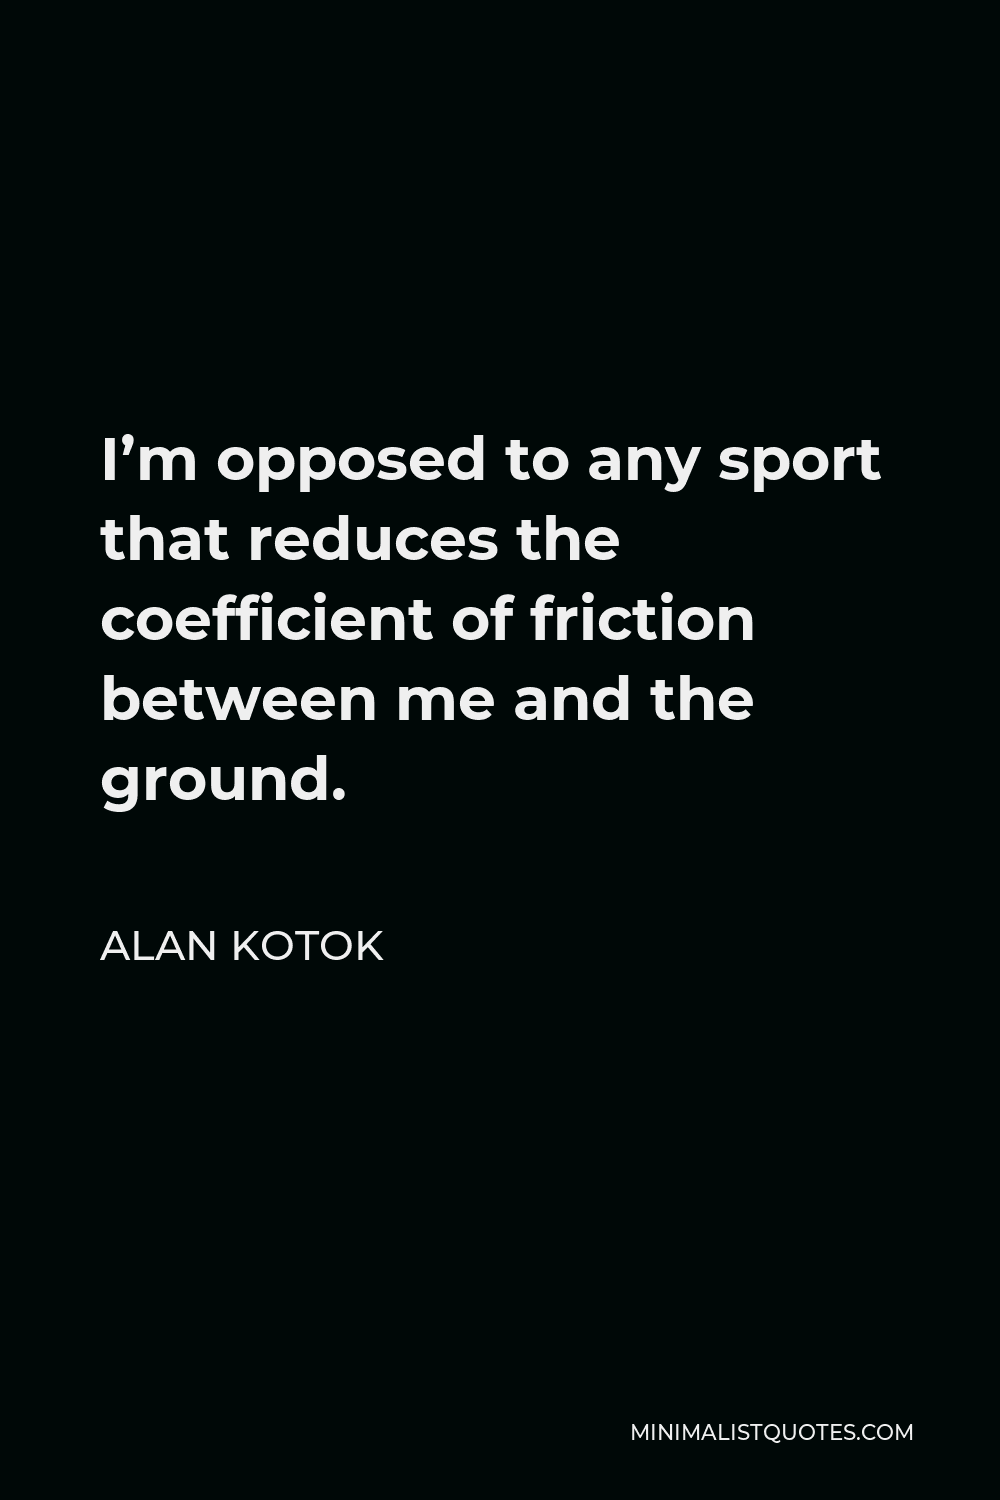 Alan Kotok Quote - I’m opposed to any sport that reduces the coefficient of friction between me and the ground.